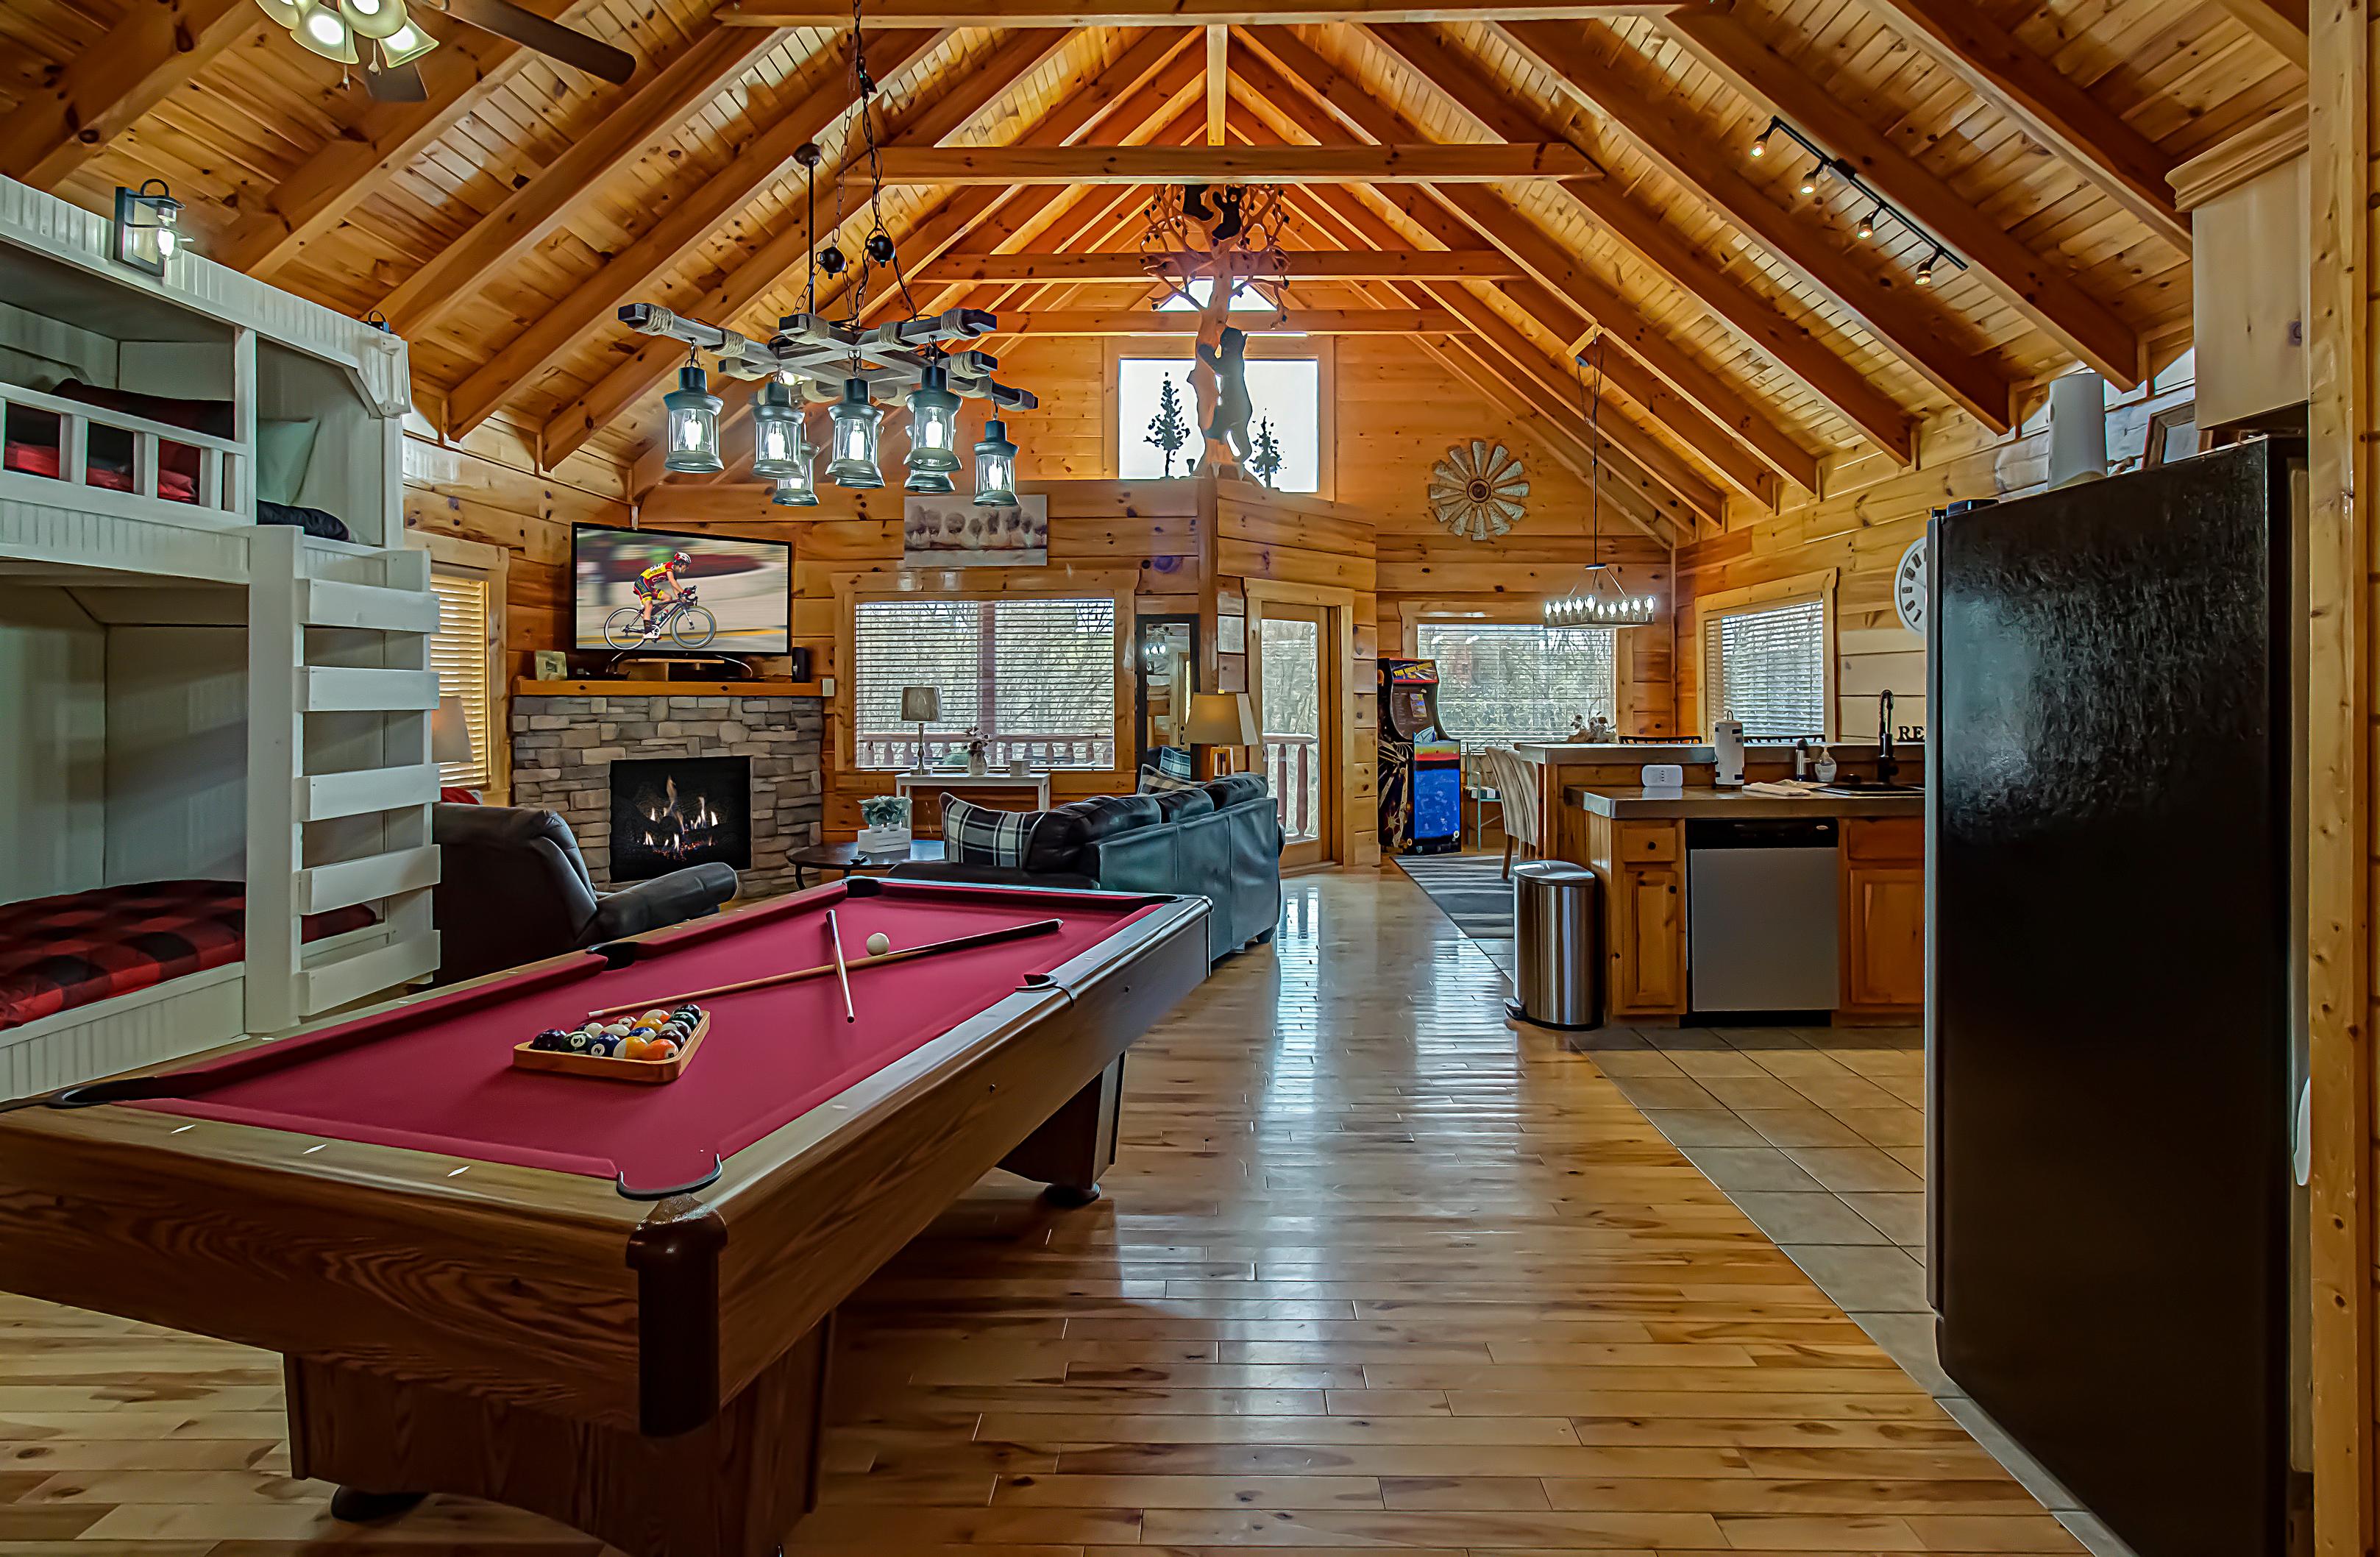 Enjoy Mountain Views, Arcade games, and your own pool table for your family or group! Reserve Moonlight Ridge today!